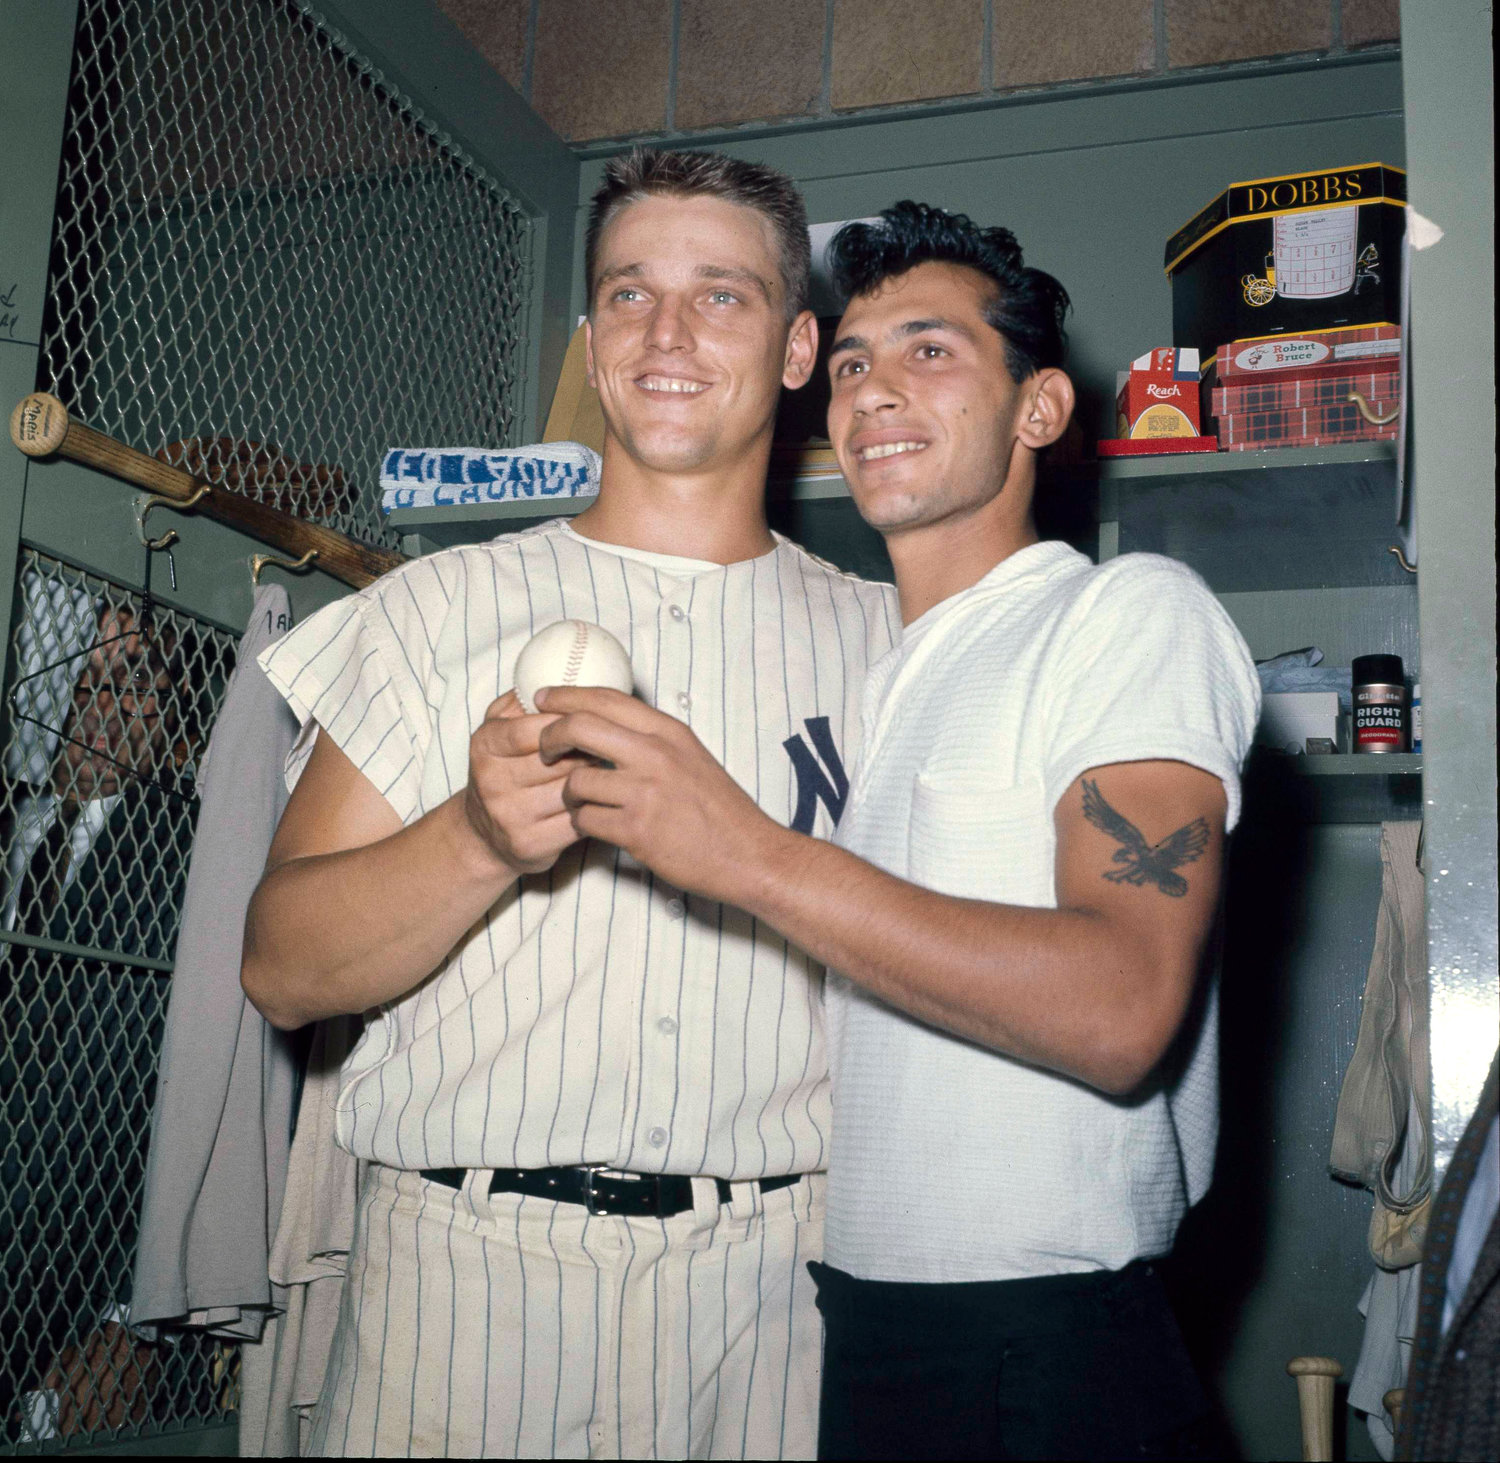 New York Yankees slugger Roger Maris poses with fan Sal Durante in the locker room at Yankee Stadium, Oct. 1, 1961, after hitting his 61st home run of the season. Durante caught Maris’ fourth inning home run into the right field seats as Maris broke Babe Ruth’s single-season home run record. If Aaron Judge passes Roger Maris, some lucky fan might become this generation’s Sal Durante.